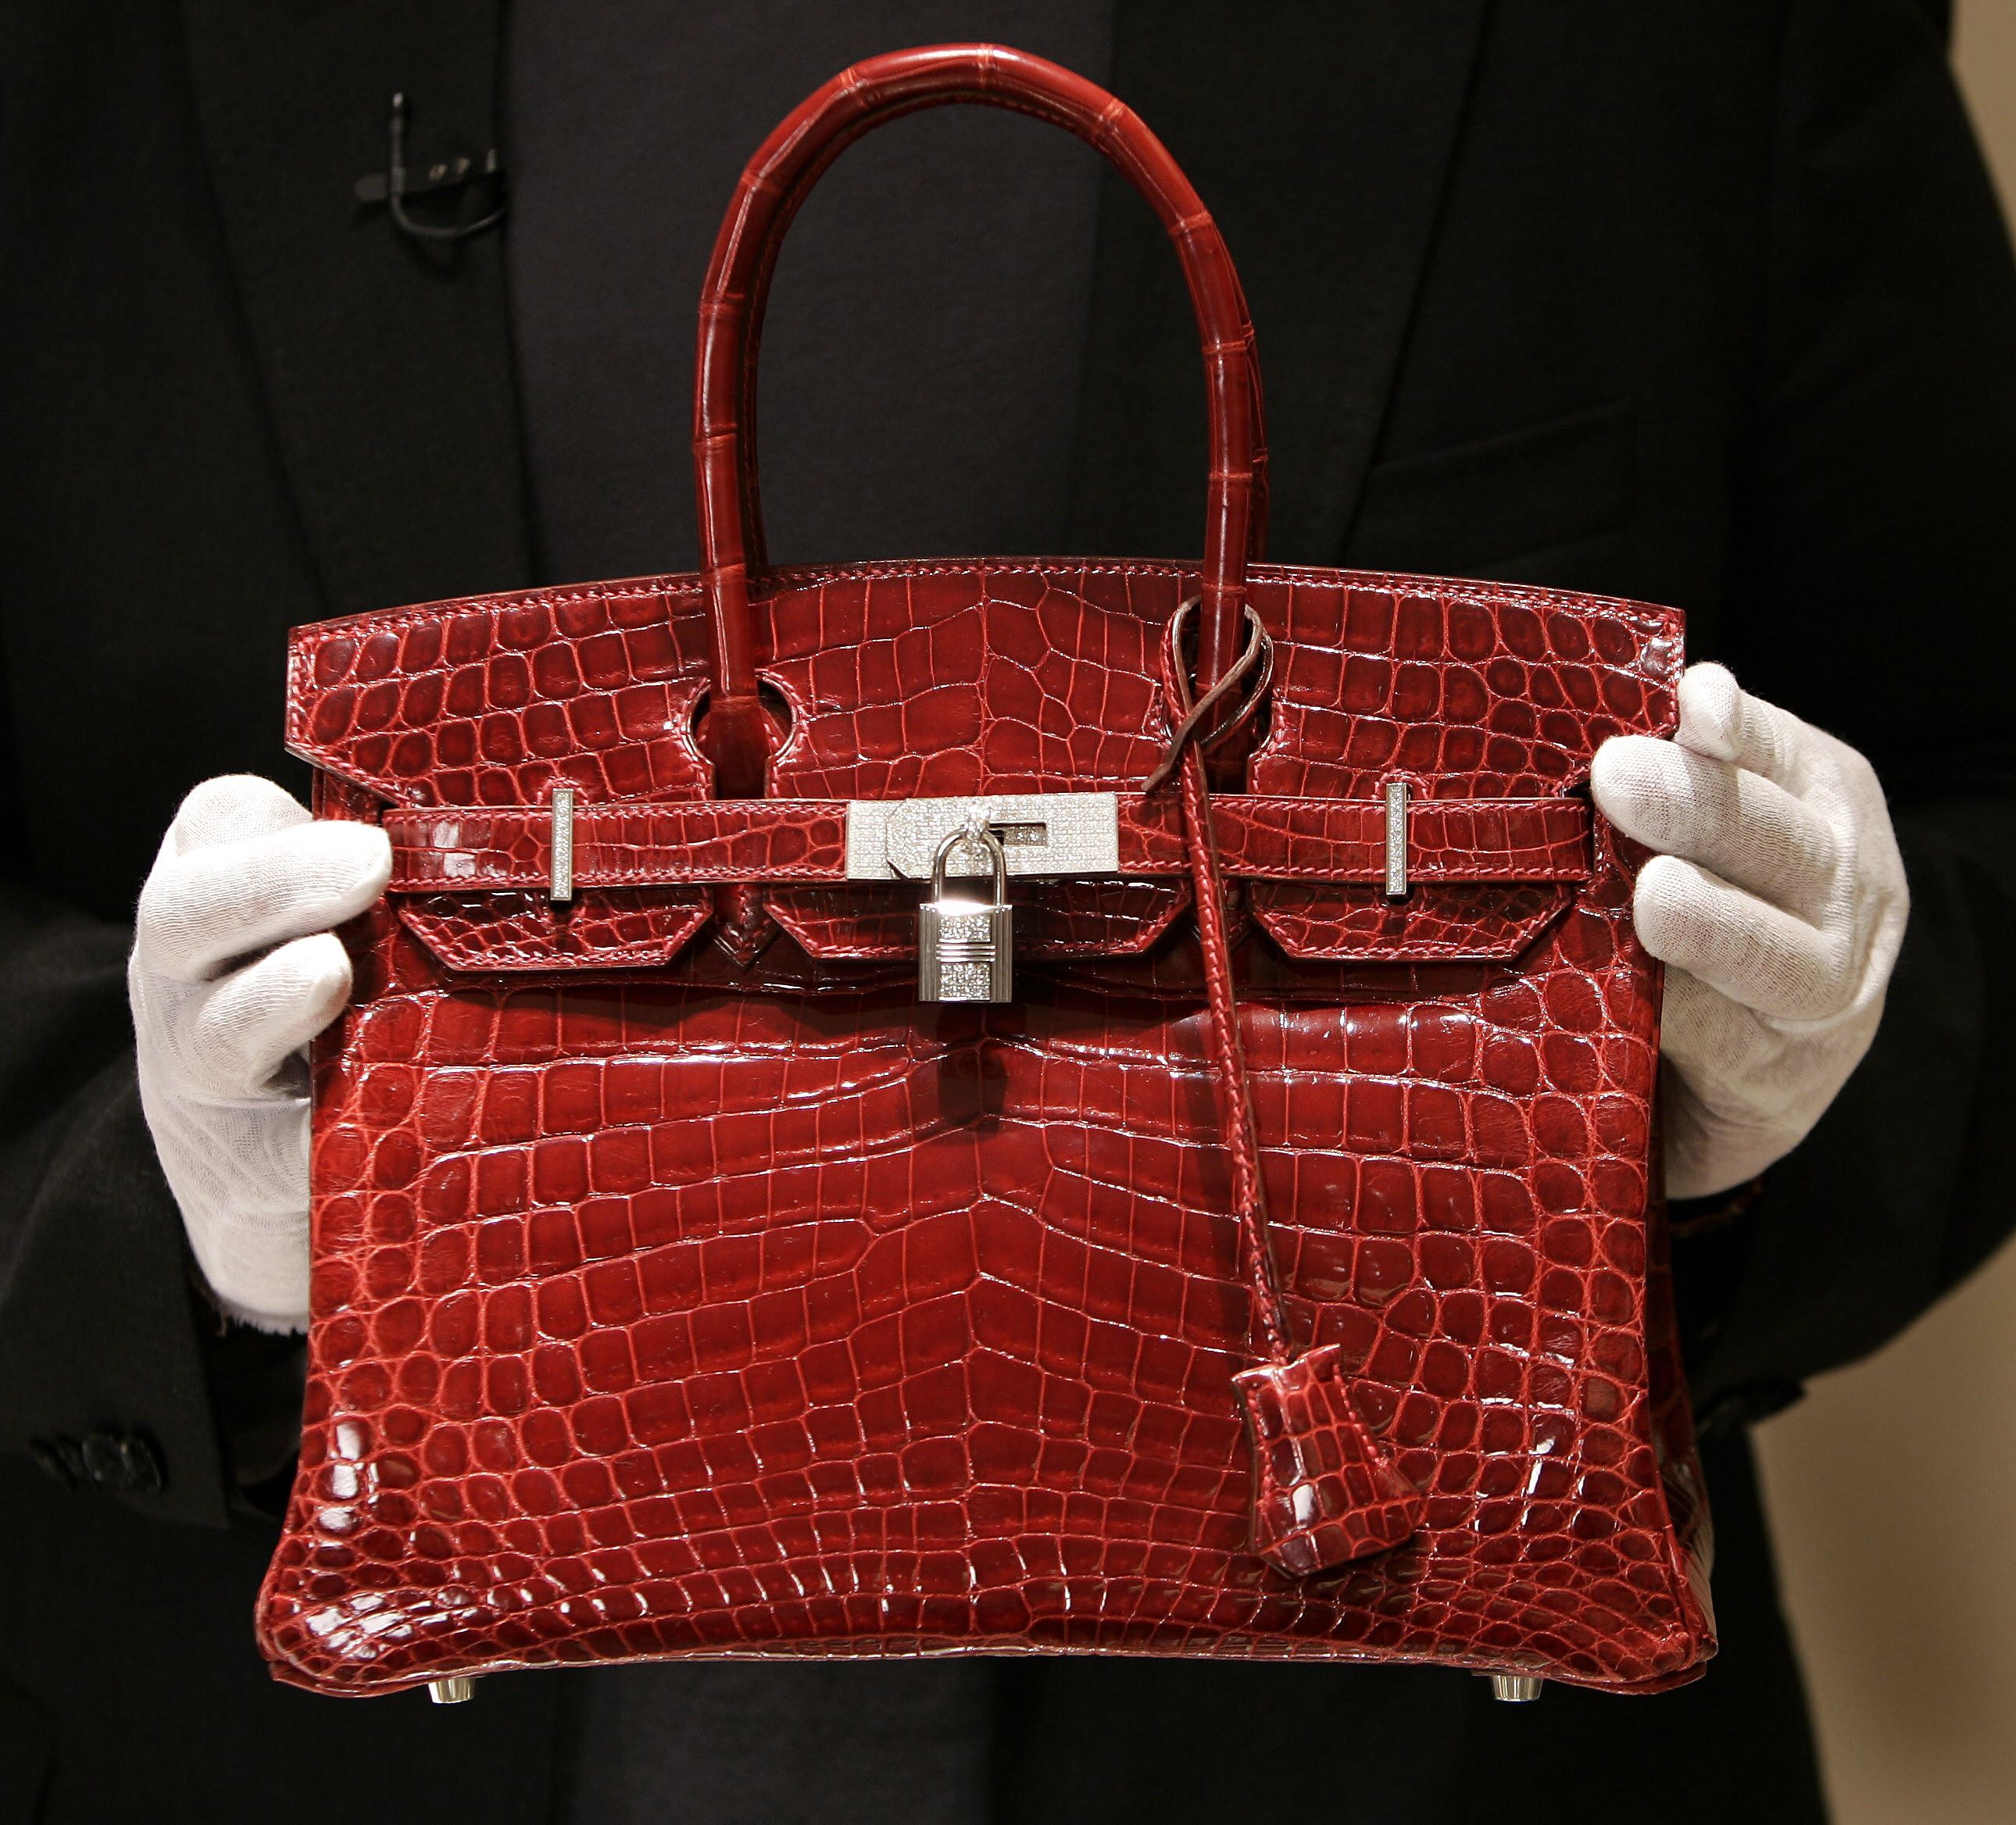 Shocking New Investigation Reveals the Horror Behind Hermès-Owned